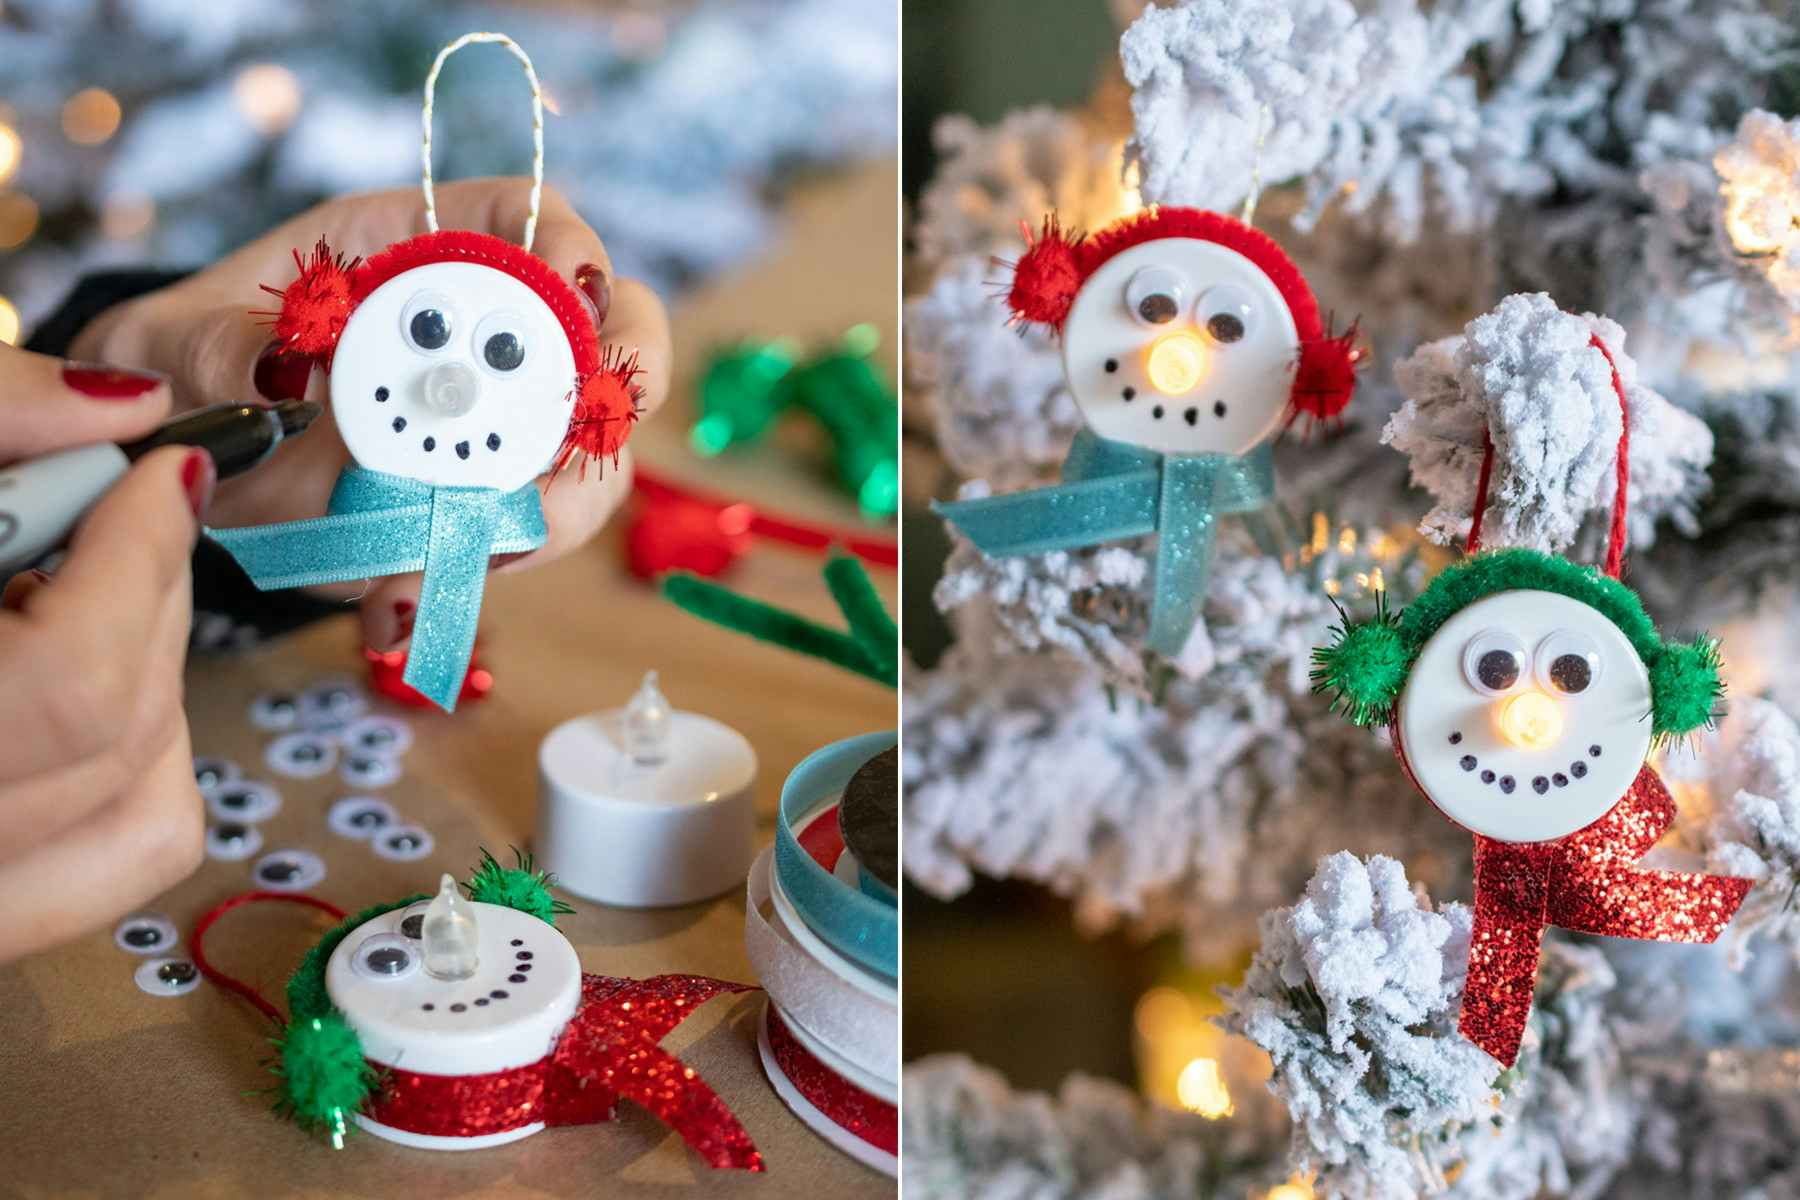 someone drawing a face on a fake candle and hanging snowman fake candles on a tree